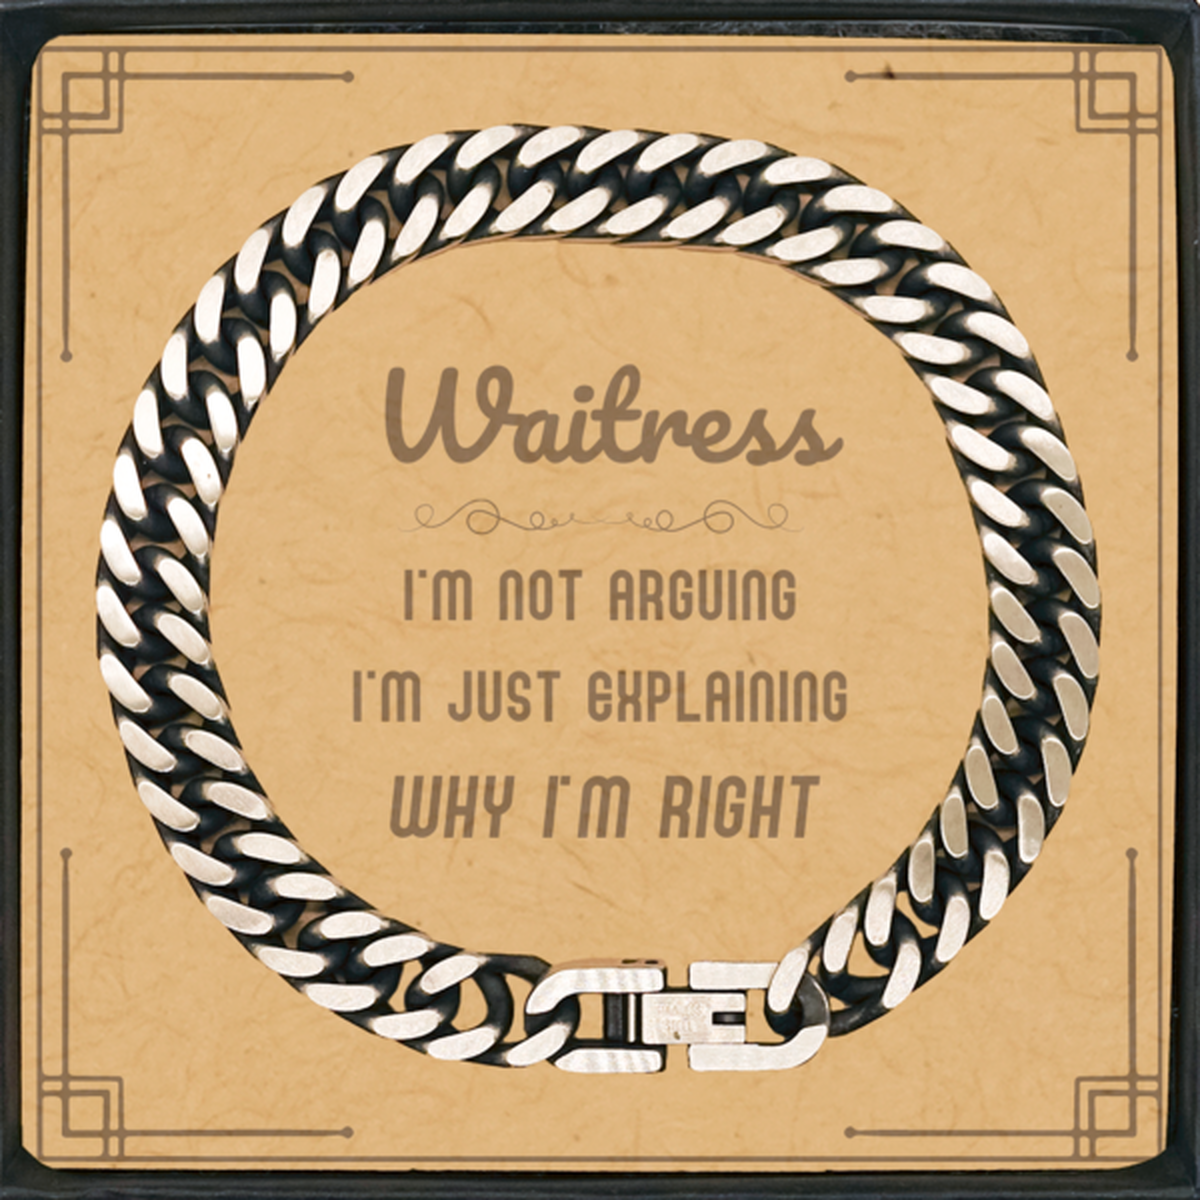 Waitress I'm not Arguing. I'm Just Explaining Why I'm RIGHT Cuban Link Chain Bracelet, Funny Saying Quote Waitress Gifts For Waitress Message Card Graduation Birthday Christmas Gifts for Men Women Coworker